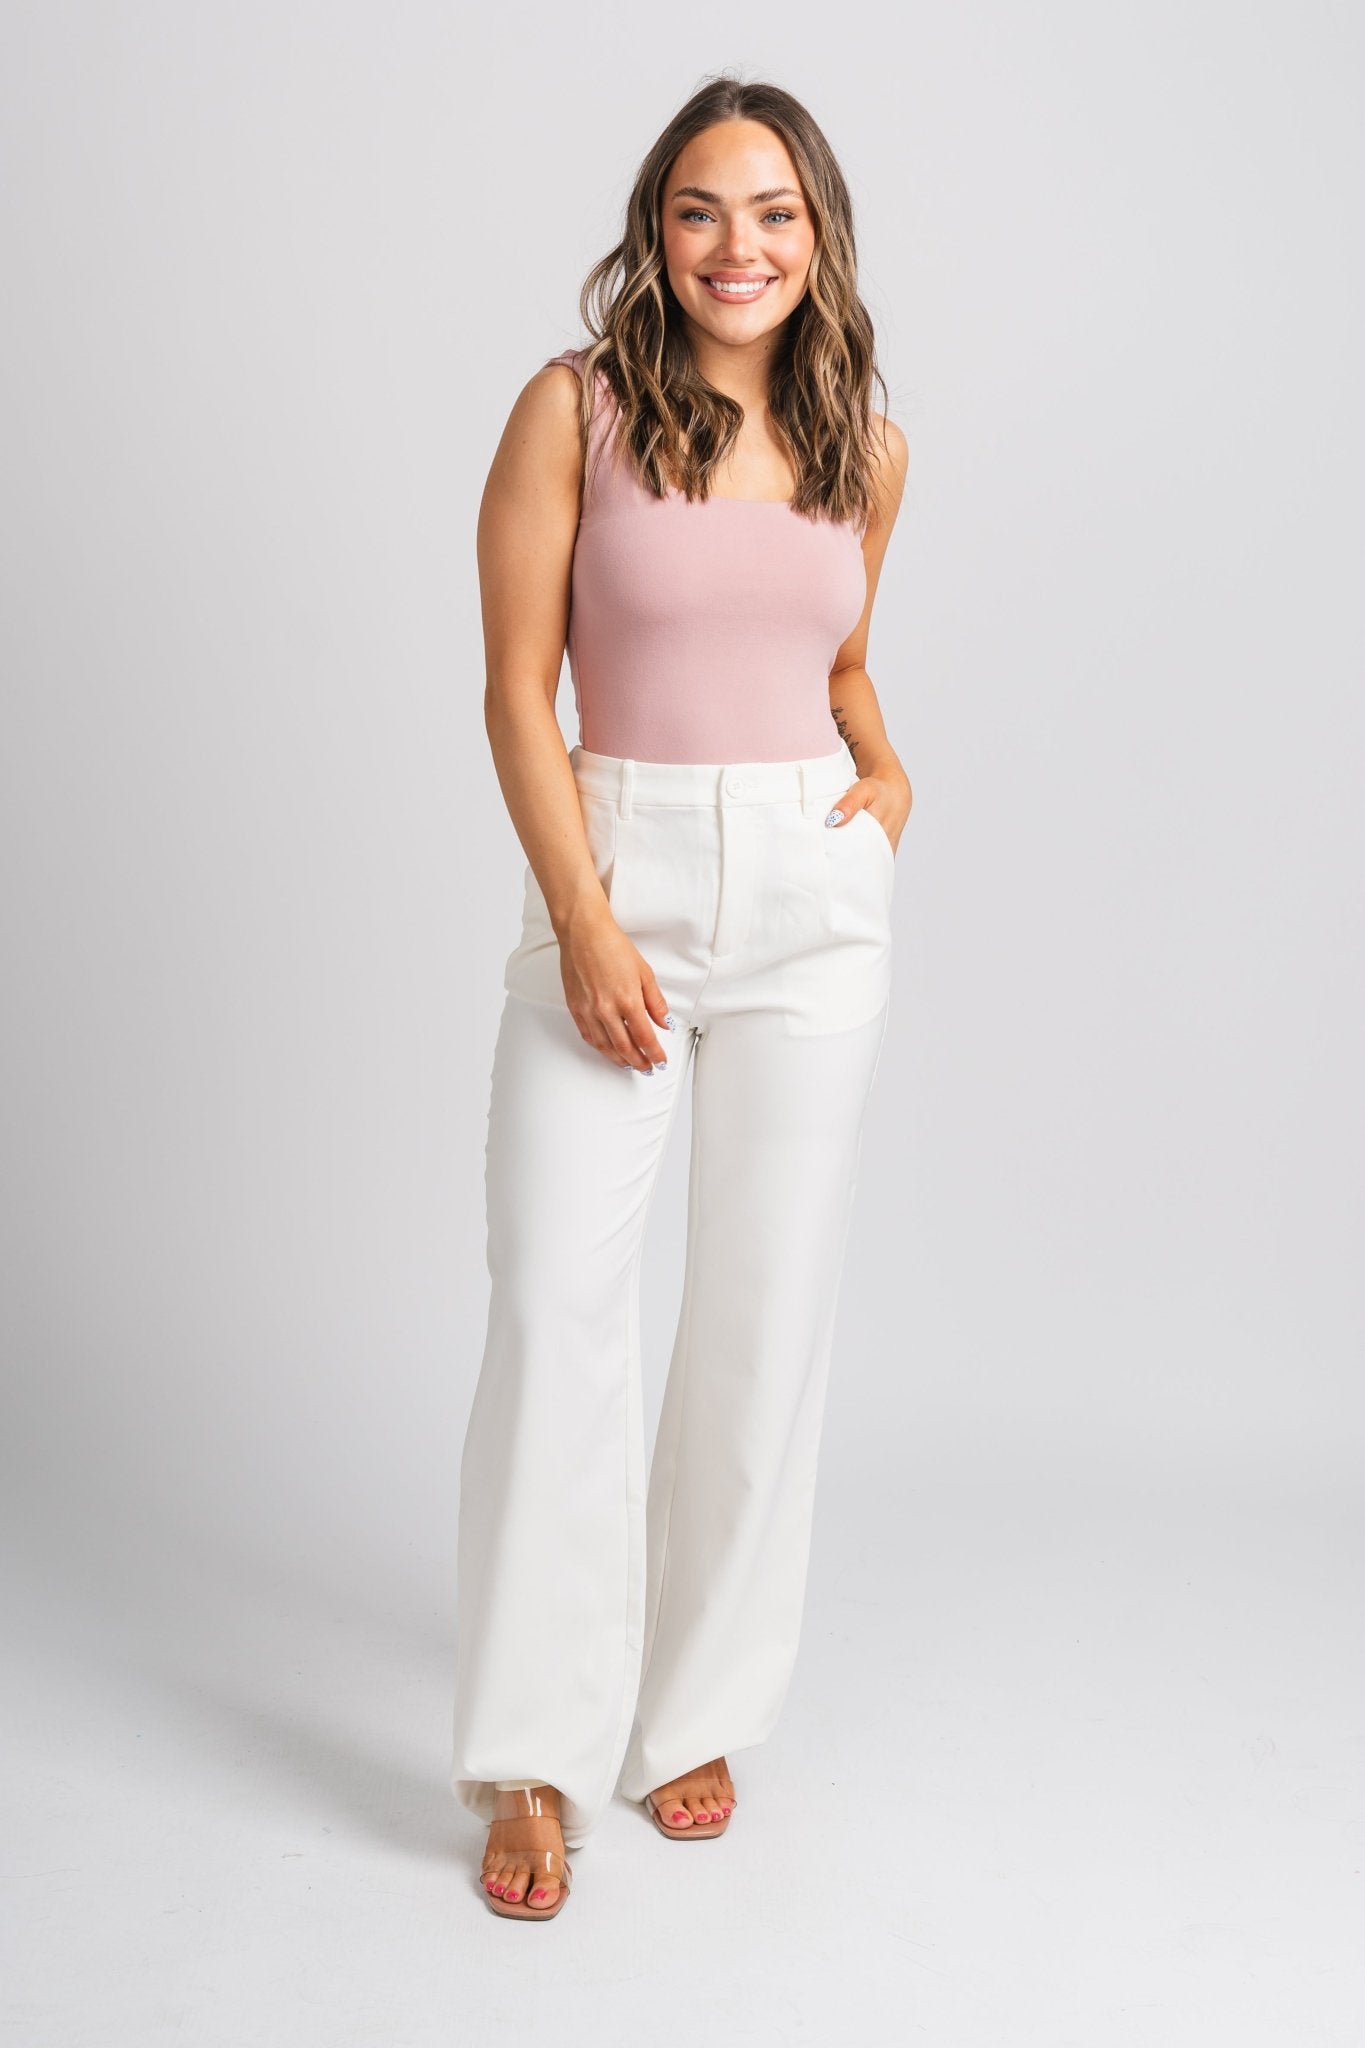 Pleated wide leg pants white - Cute Pants - Trendy Easter Clothing Line at Lush Fashion Lounge Boutique in Oklahoma